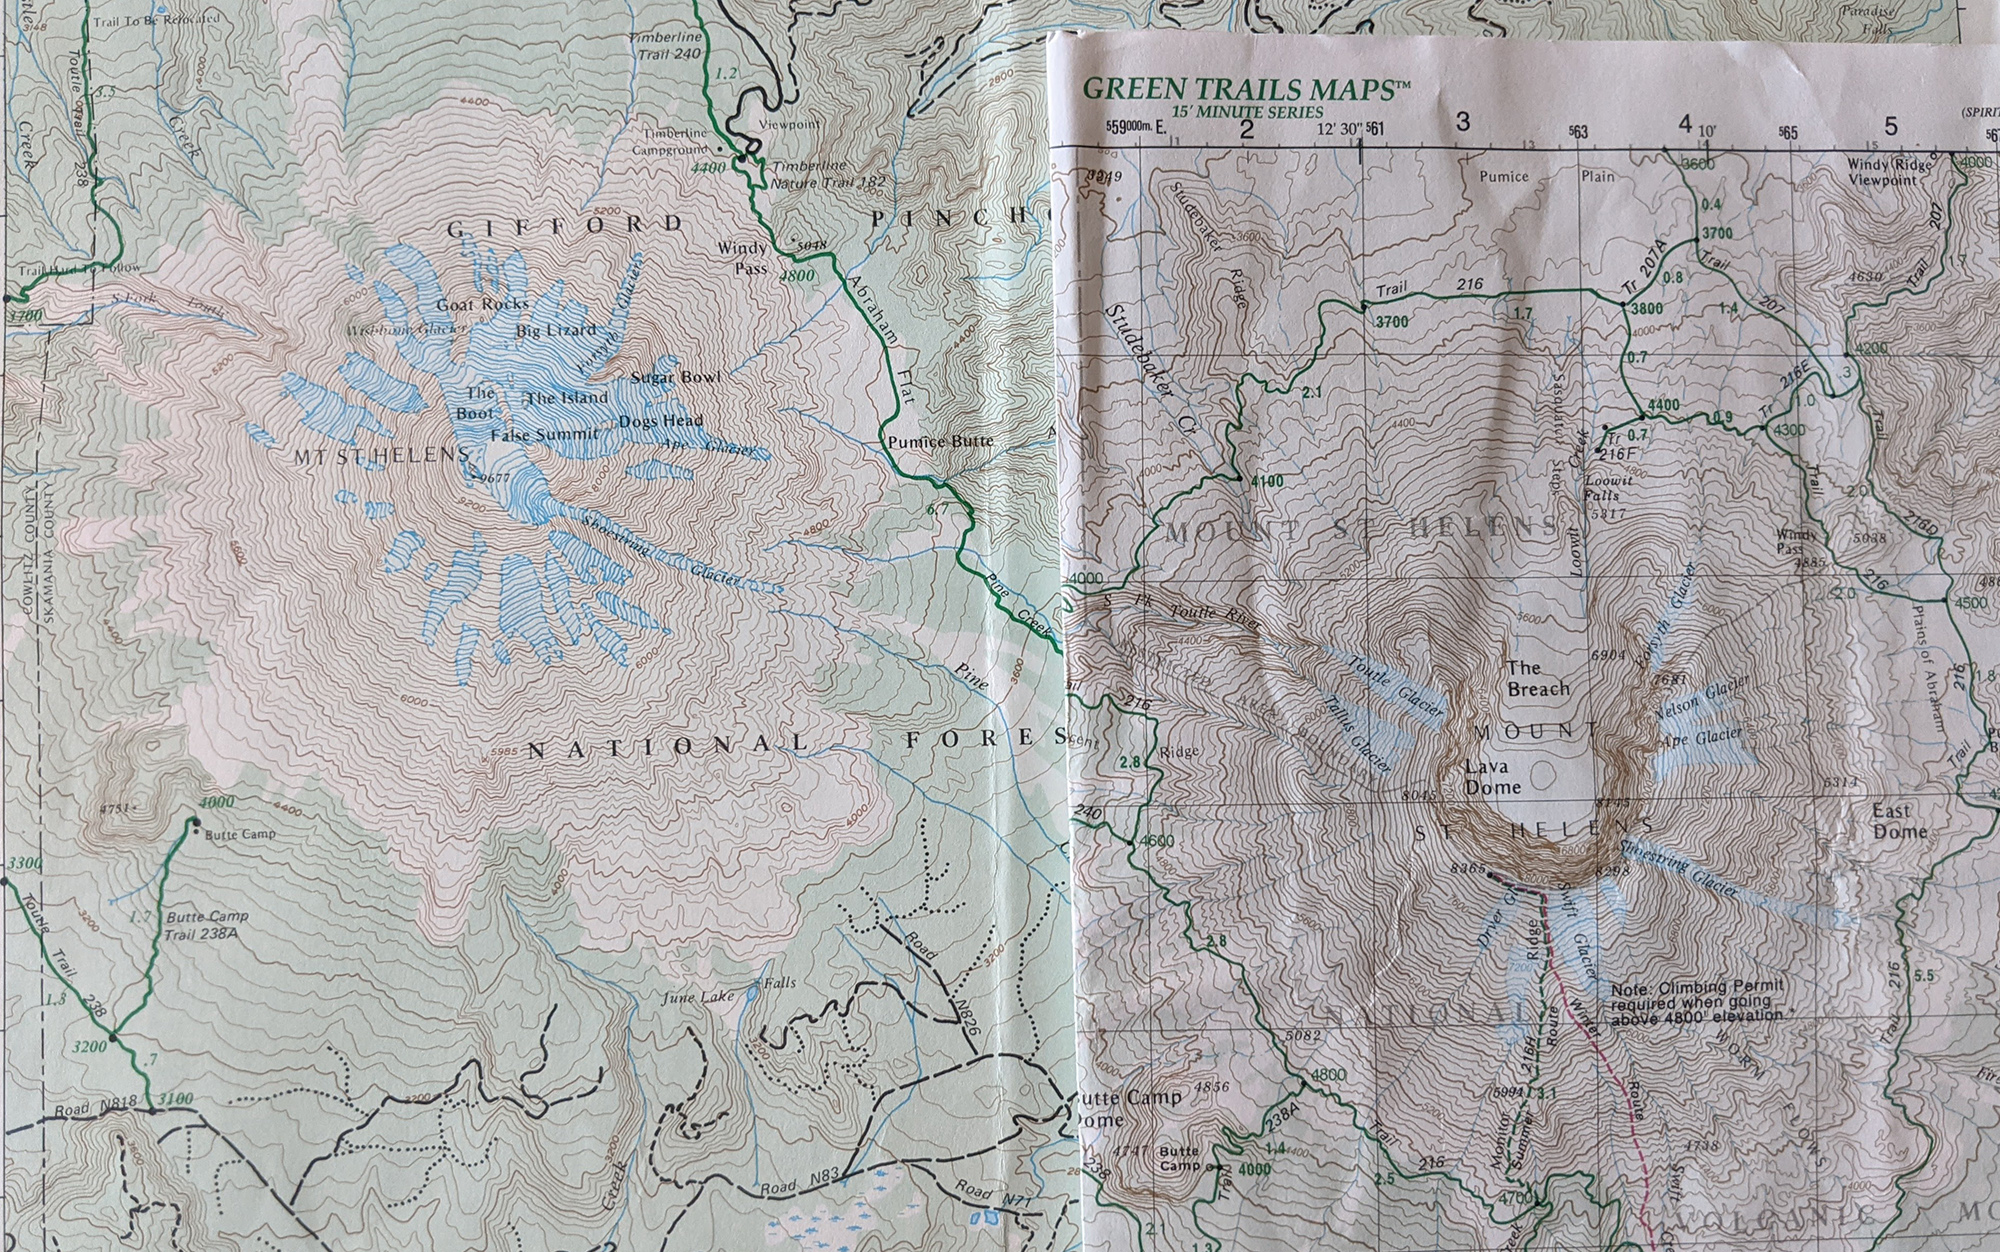 A lot changed on the Green Trails maps of Mount St. Helens between 1978 and 2001.